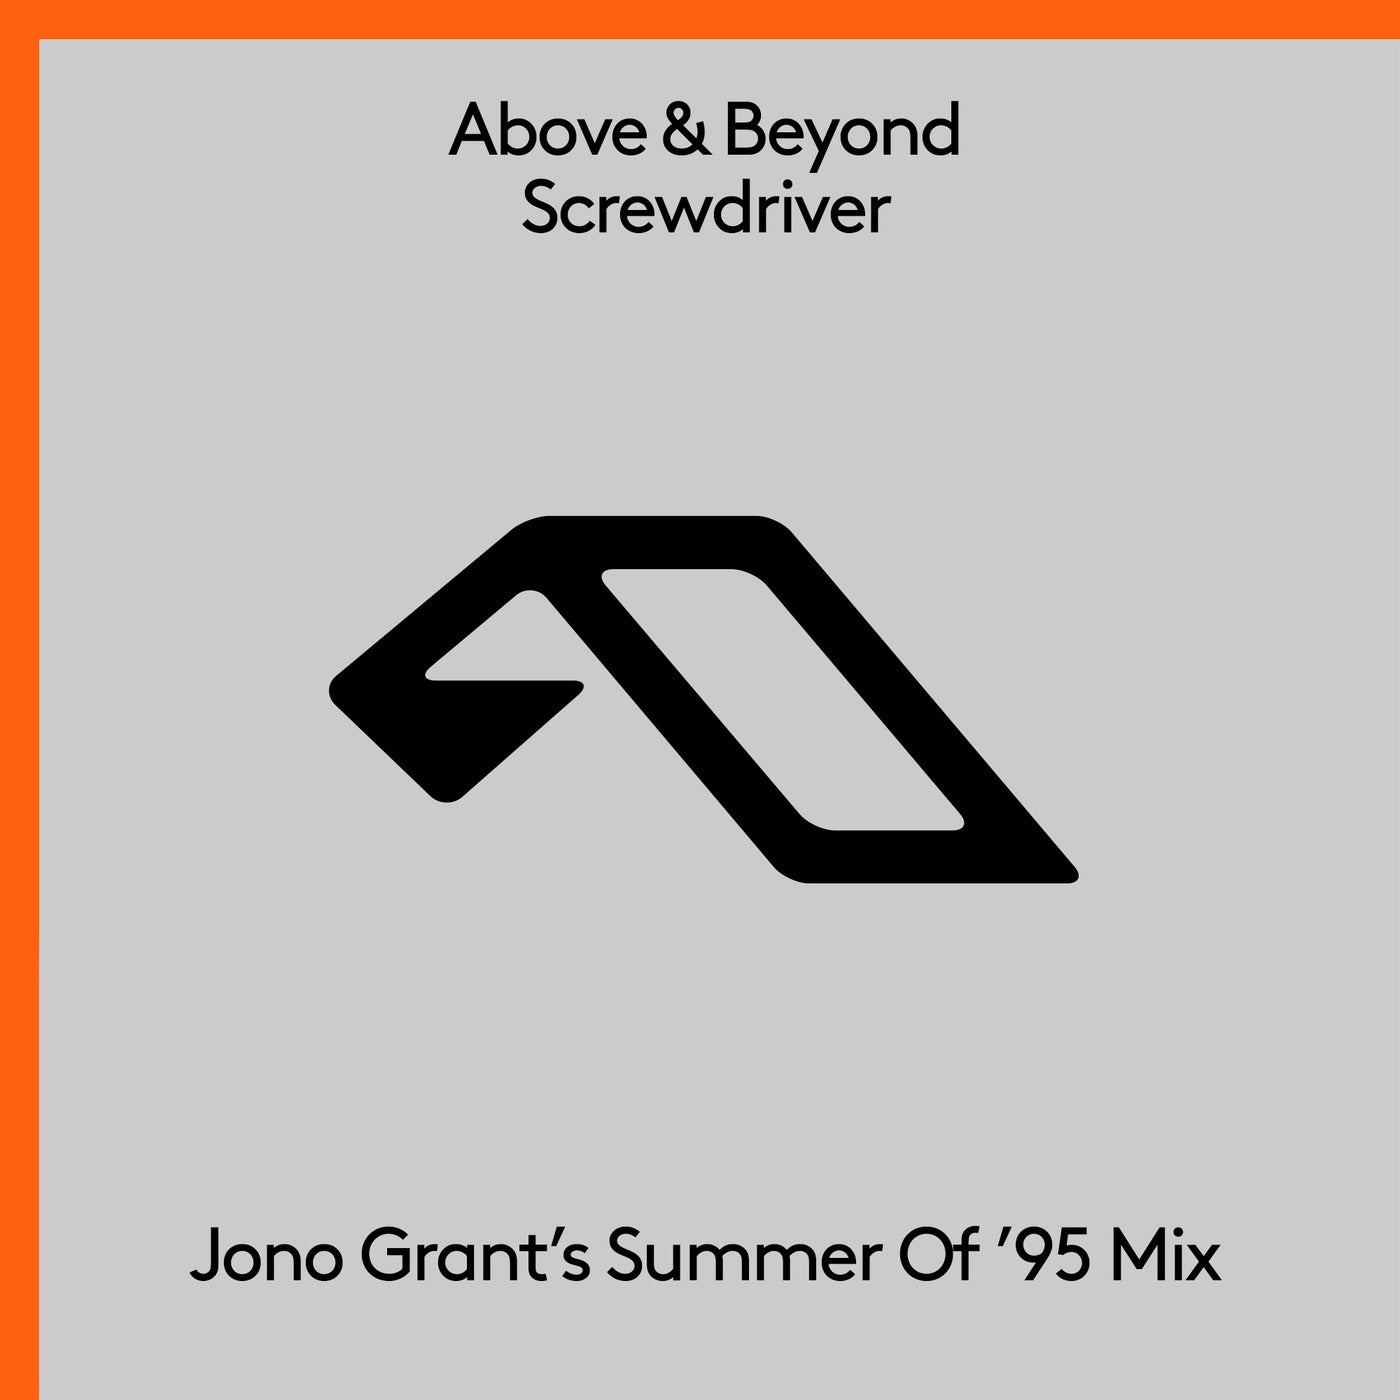 Screwdriver (Jono Grant's Summer Of '95 Extended Mix)